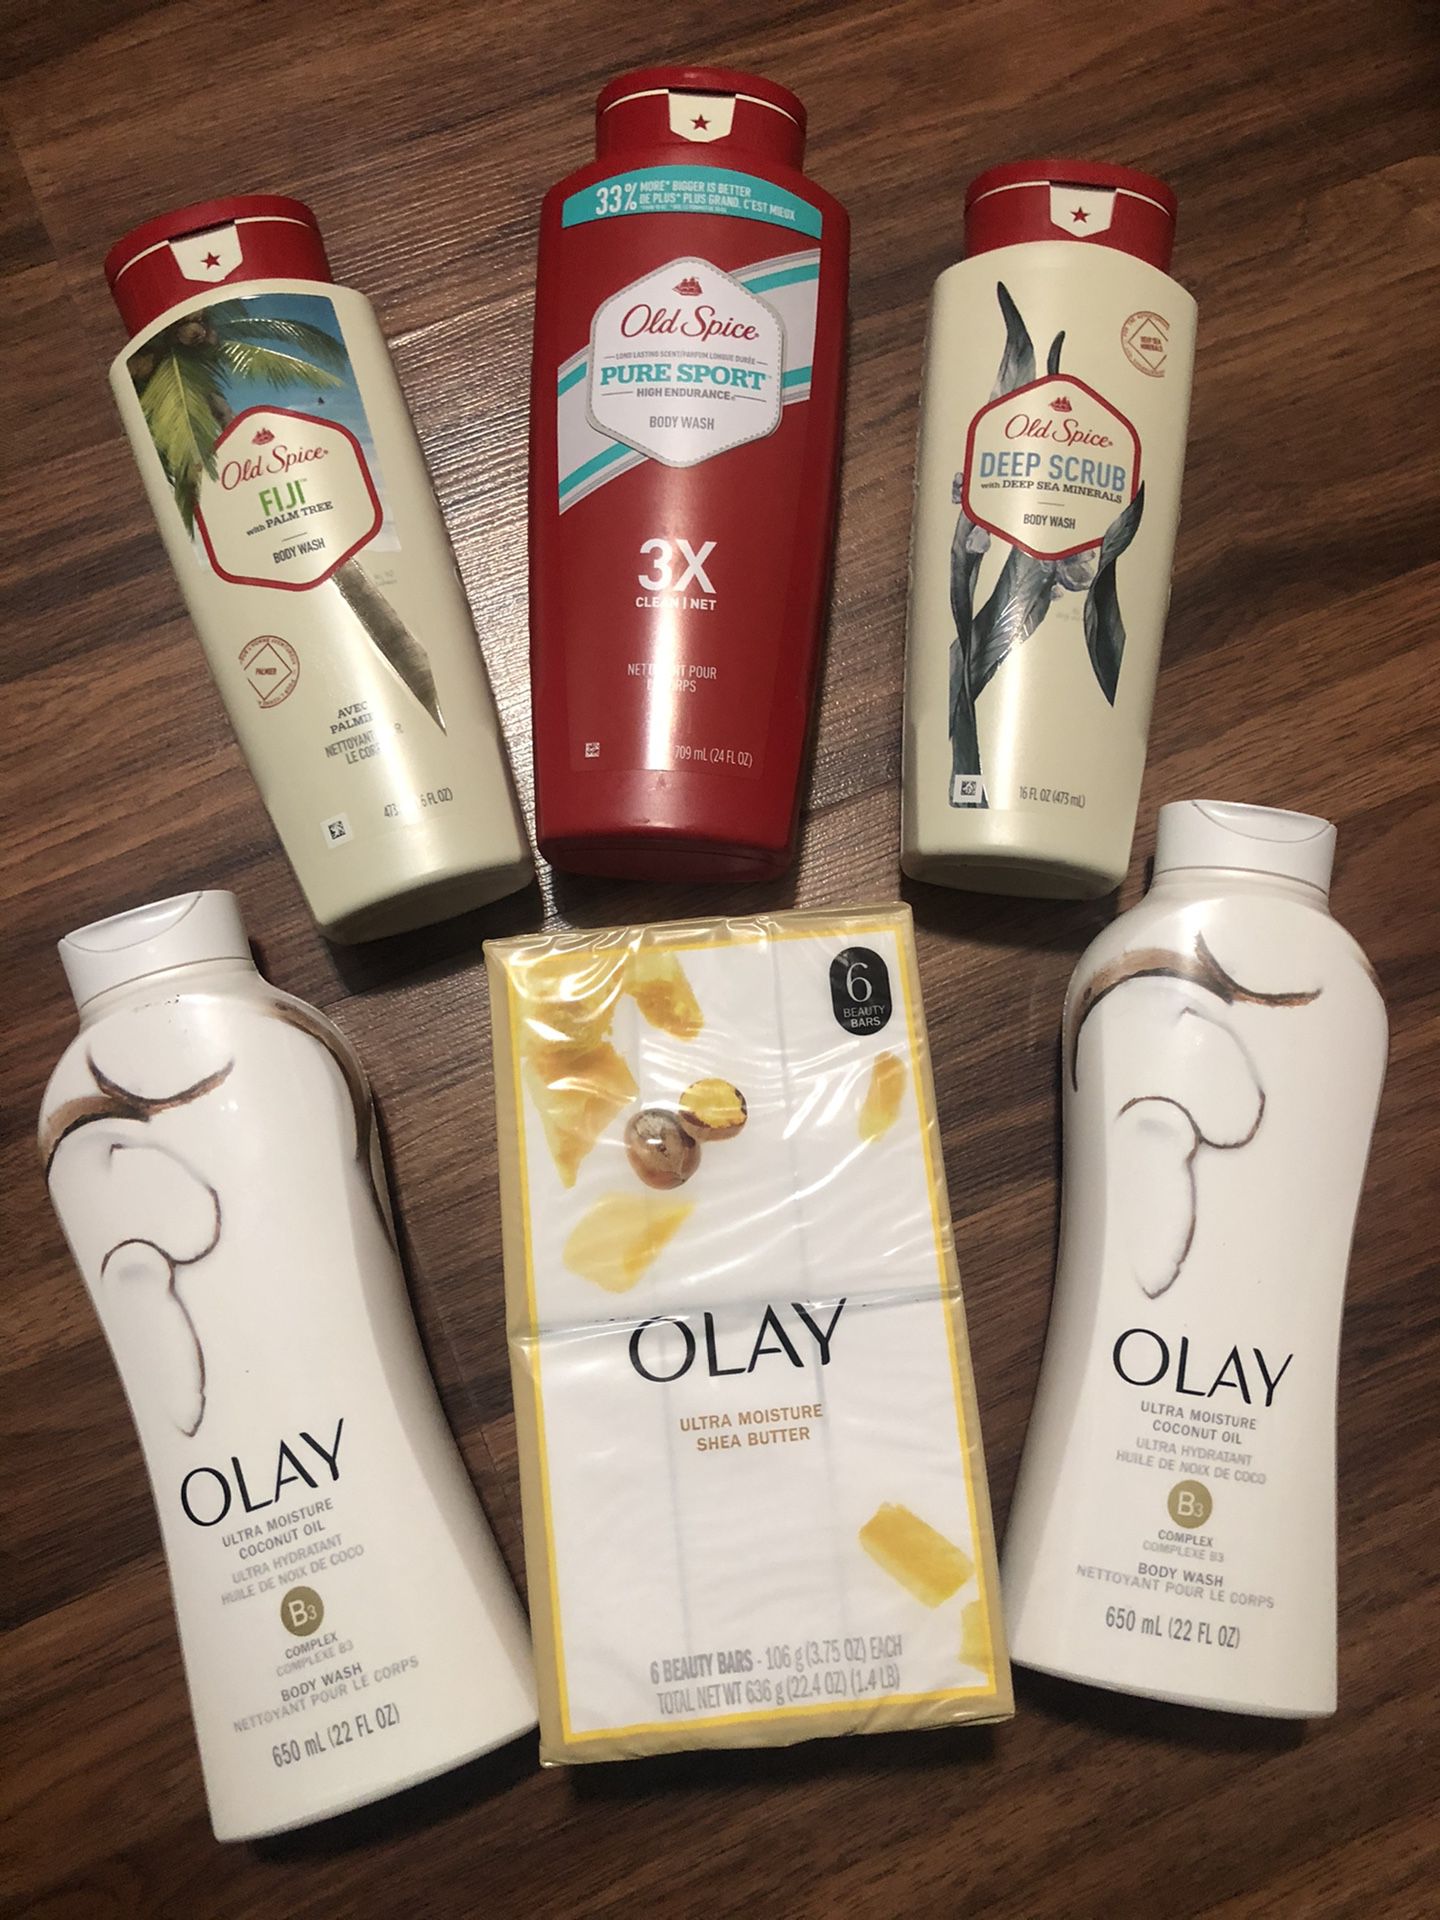 Old spice and Olay , all for $25